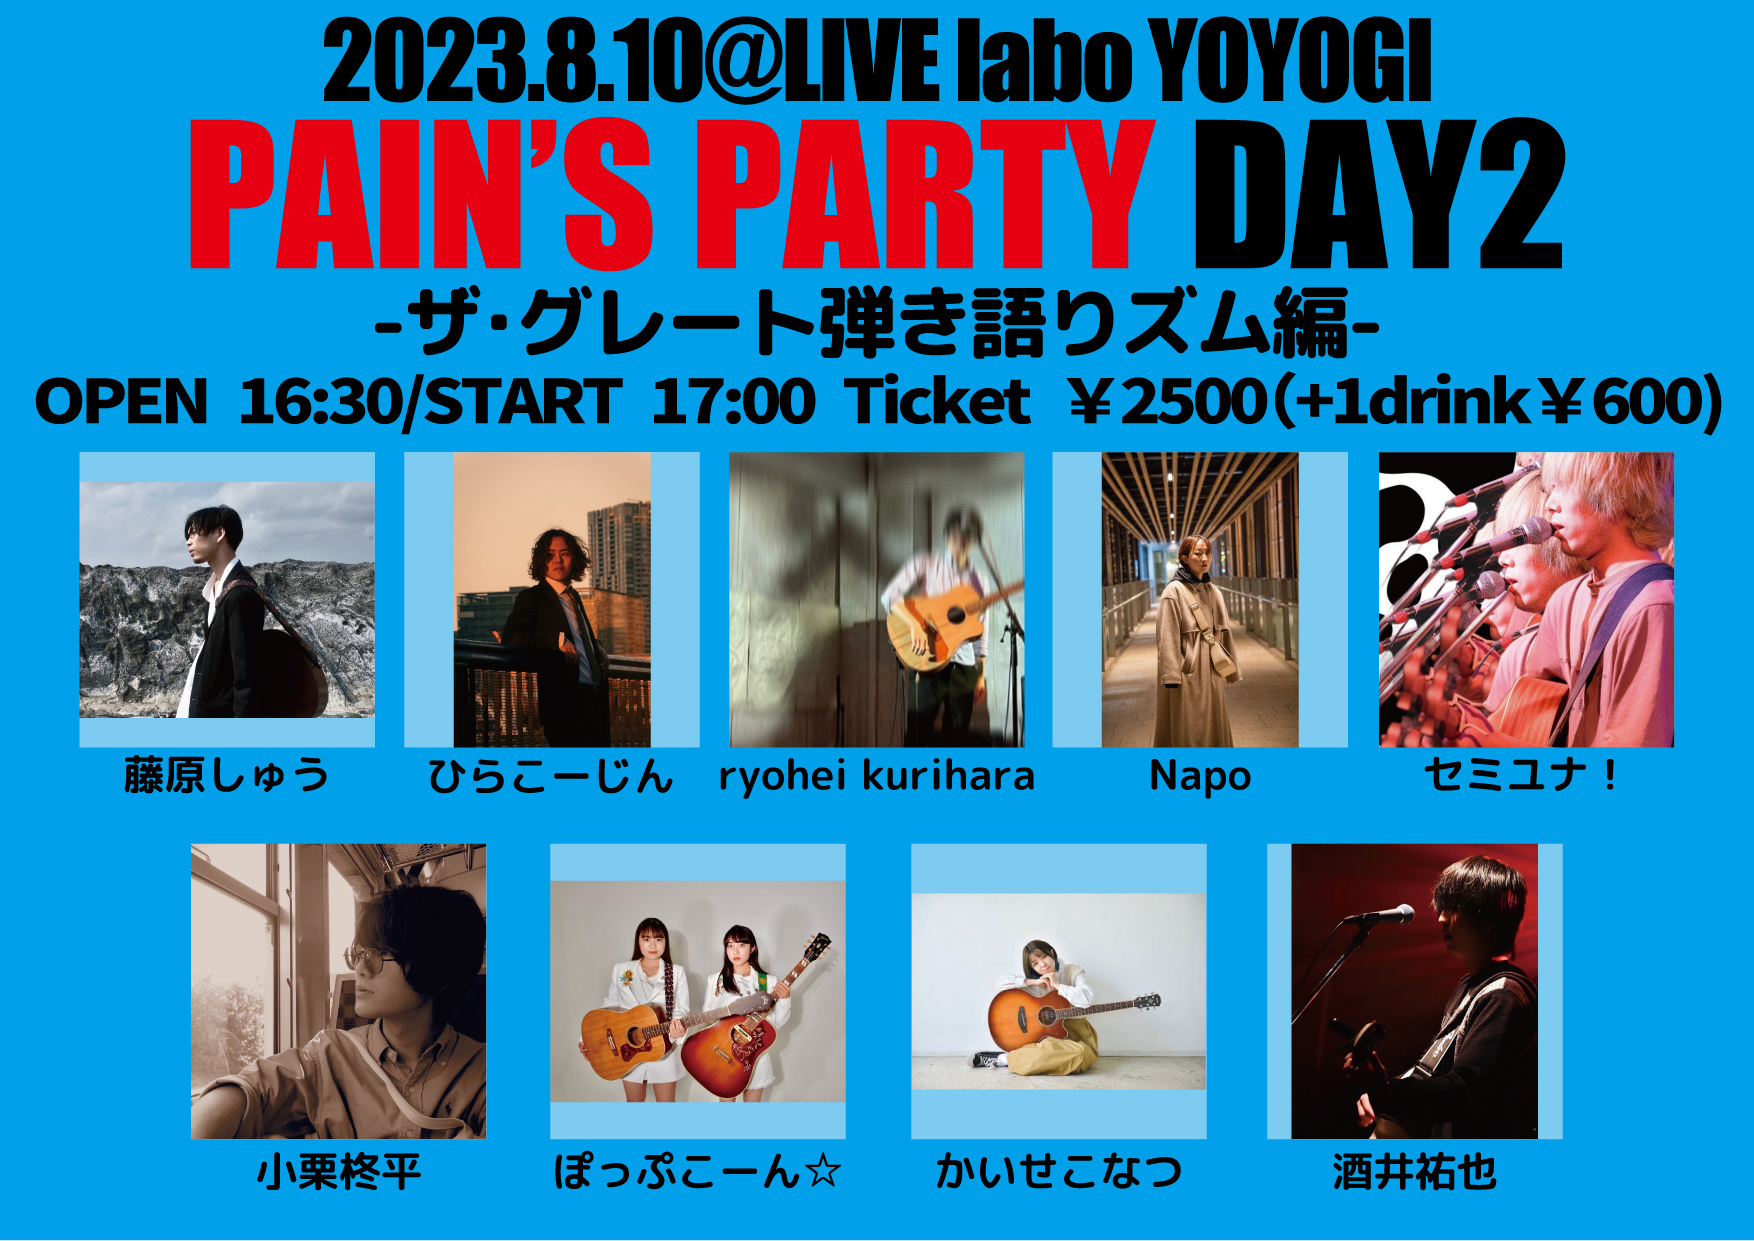 PAIN'S PARTY DAY2
-ザ・グレート弾き語りズム編-